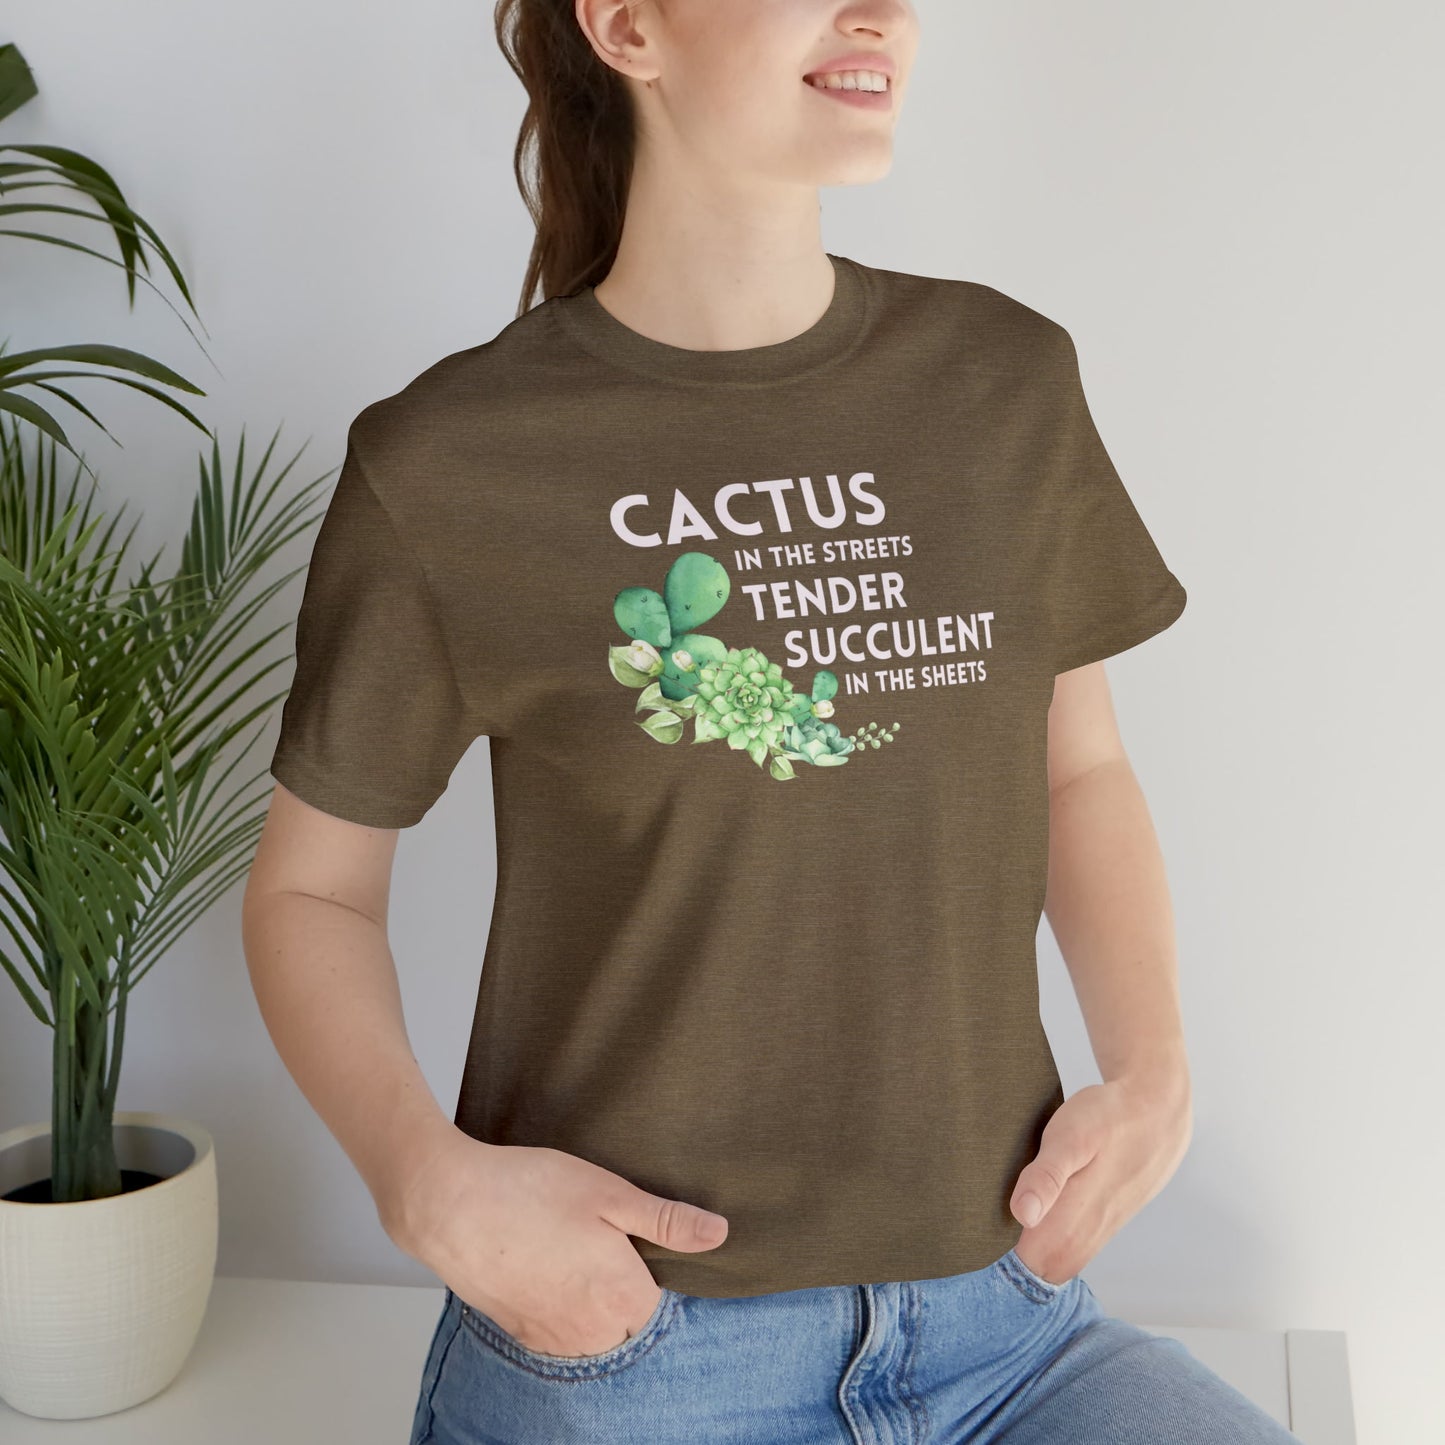 Cactus in the Streets Tender Succulent in the Street Jersey Short Sleeve Tee [Multiple Color Options]